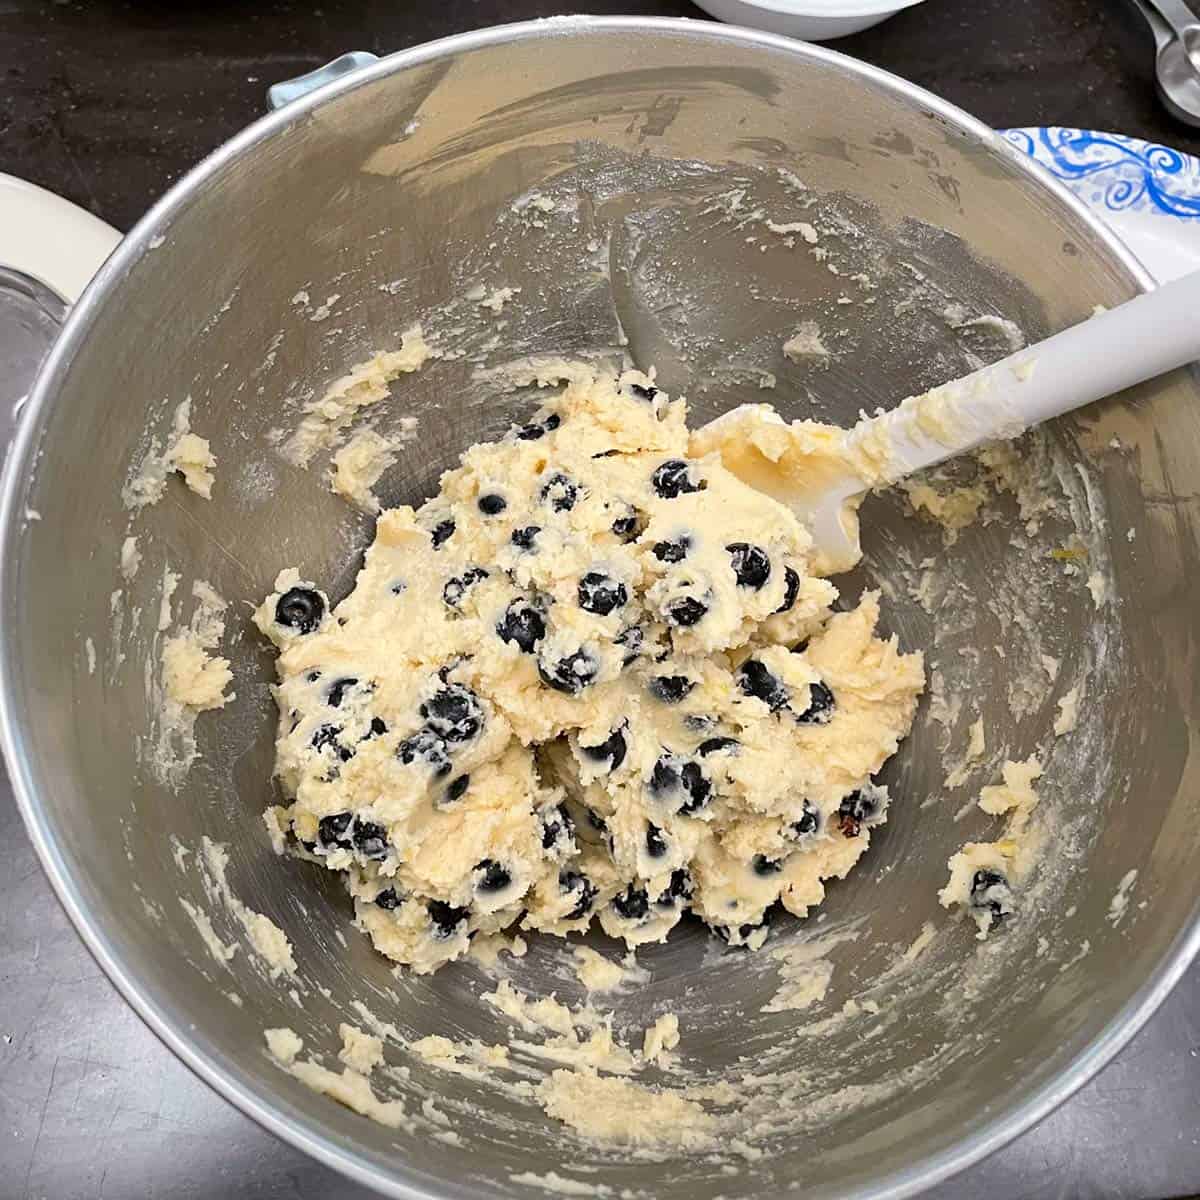 Blueberries being folded into cookie batter.